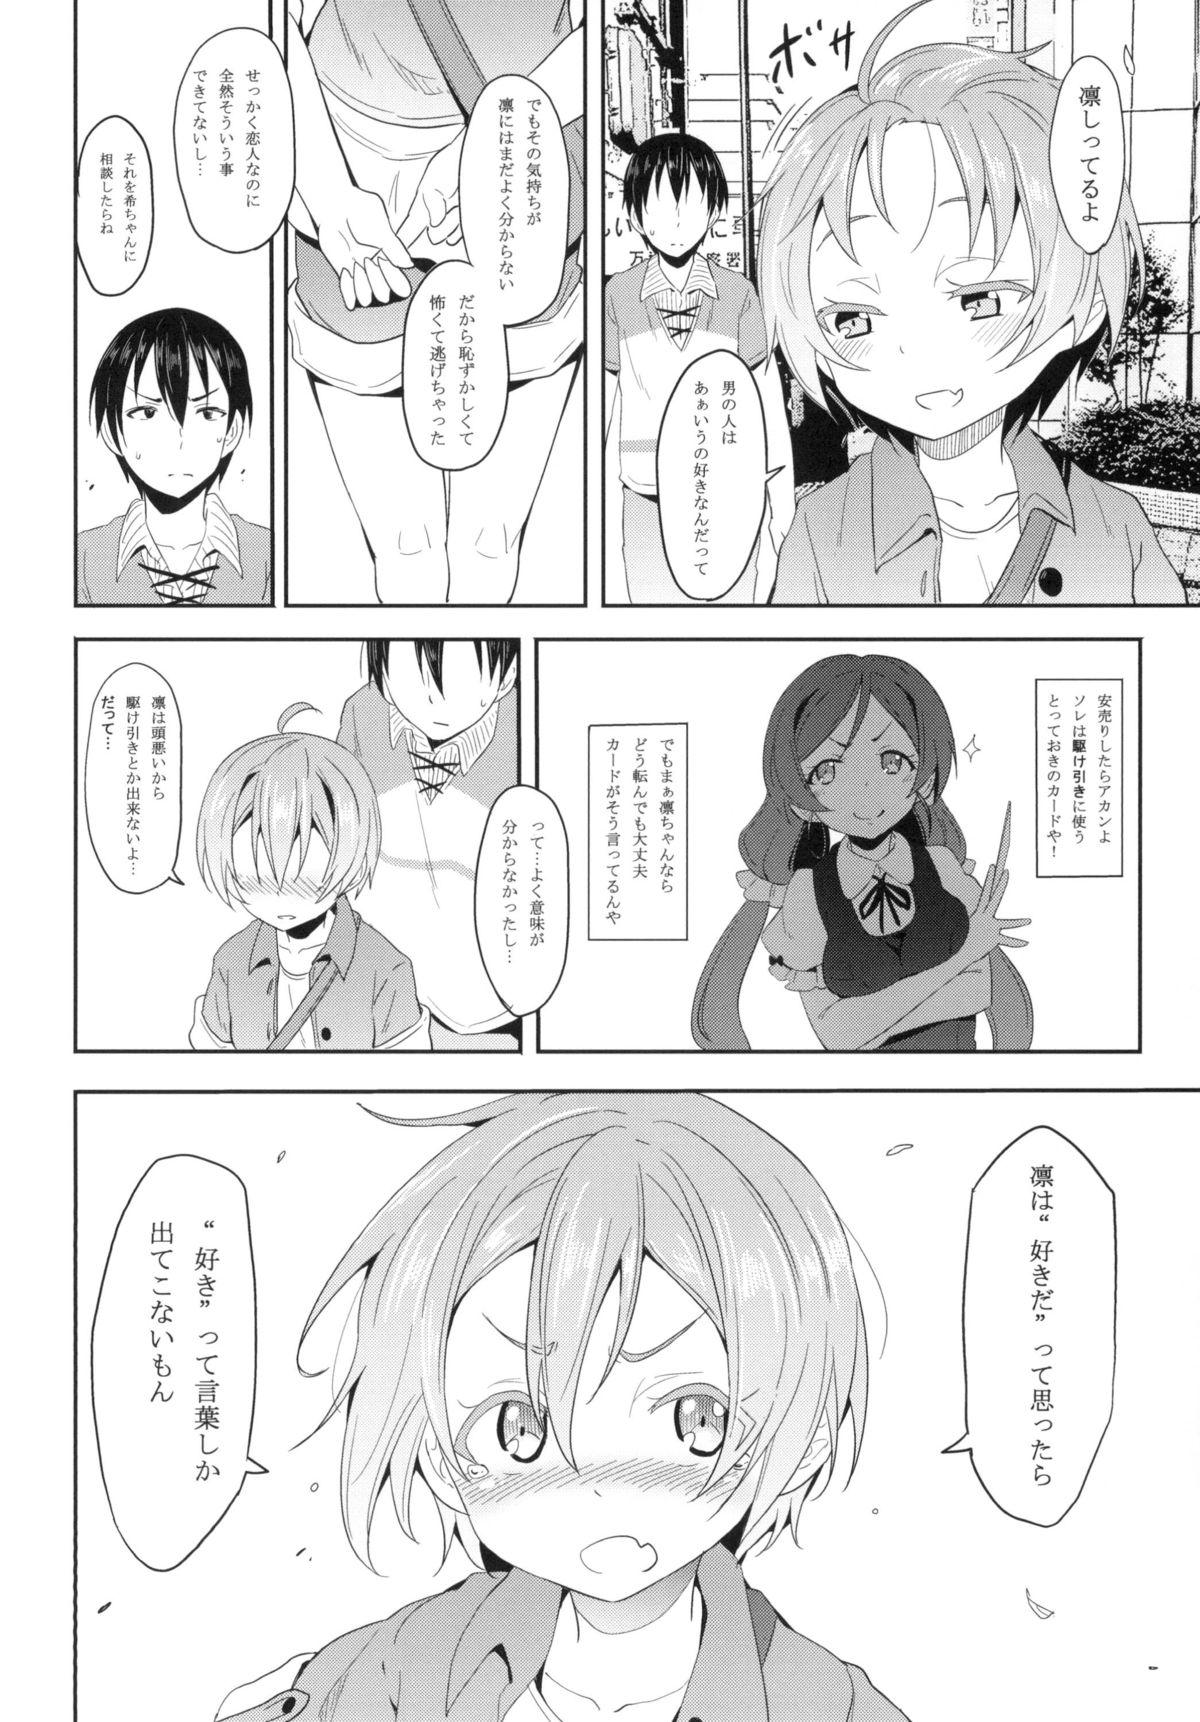 Cream Rin-chan to Issho. - Love live Students - Page 6